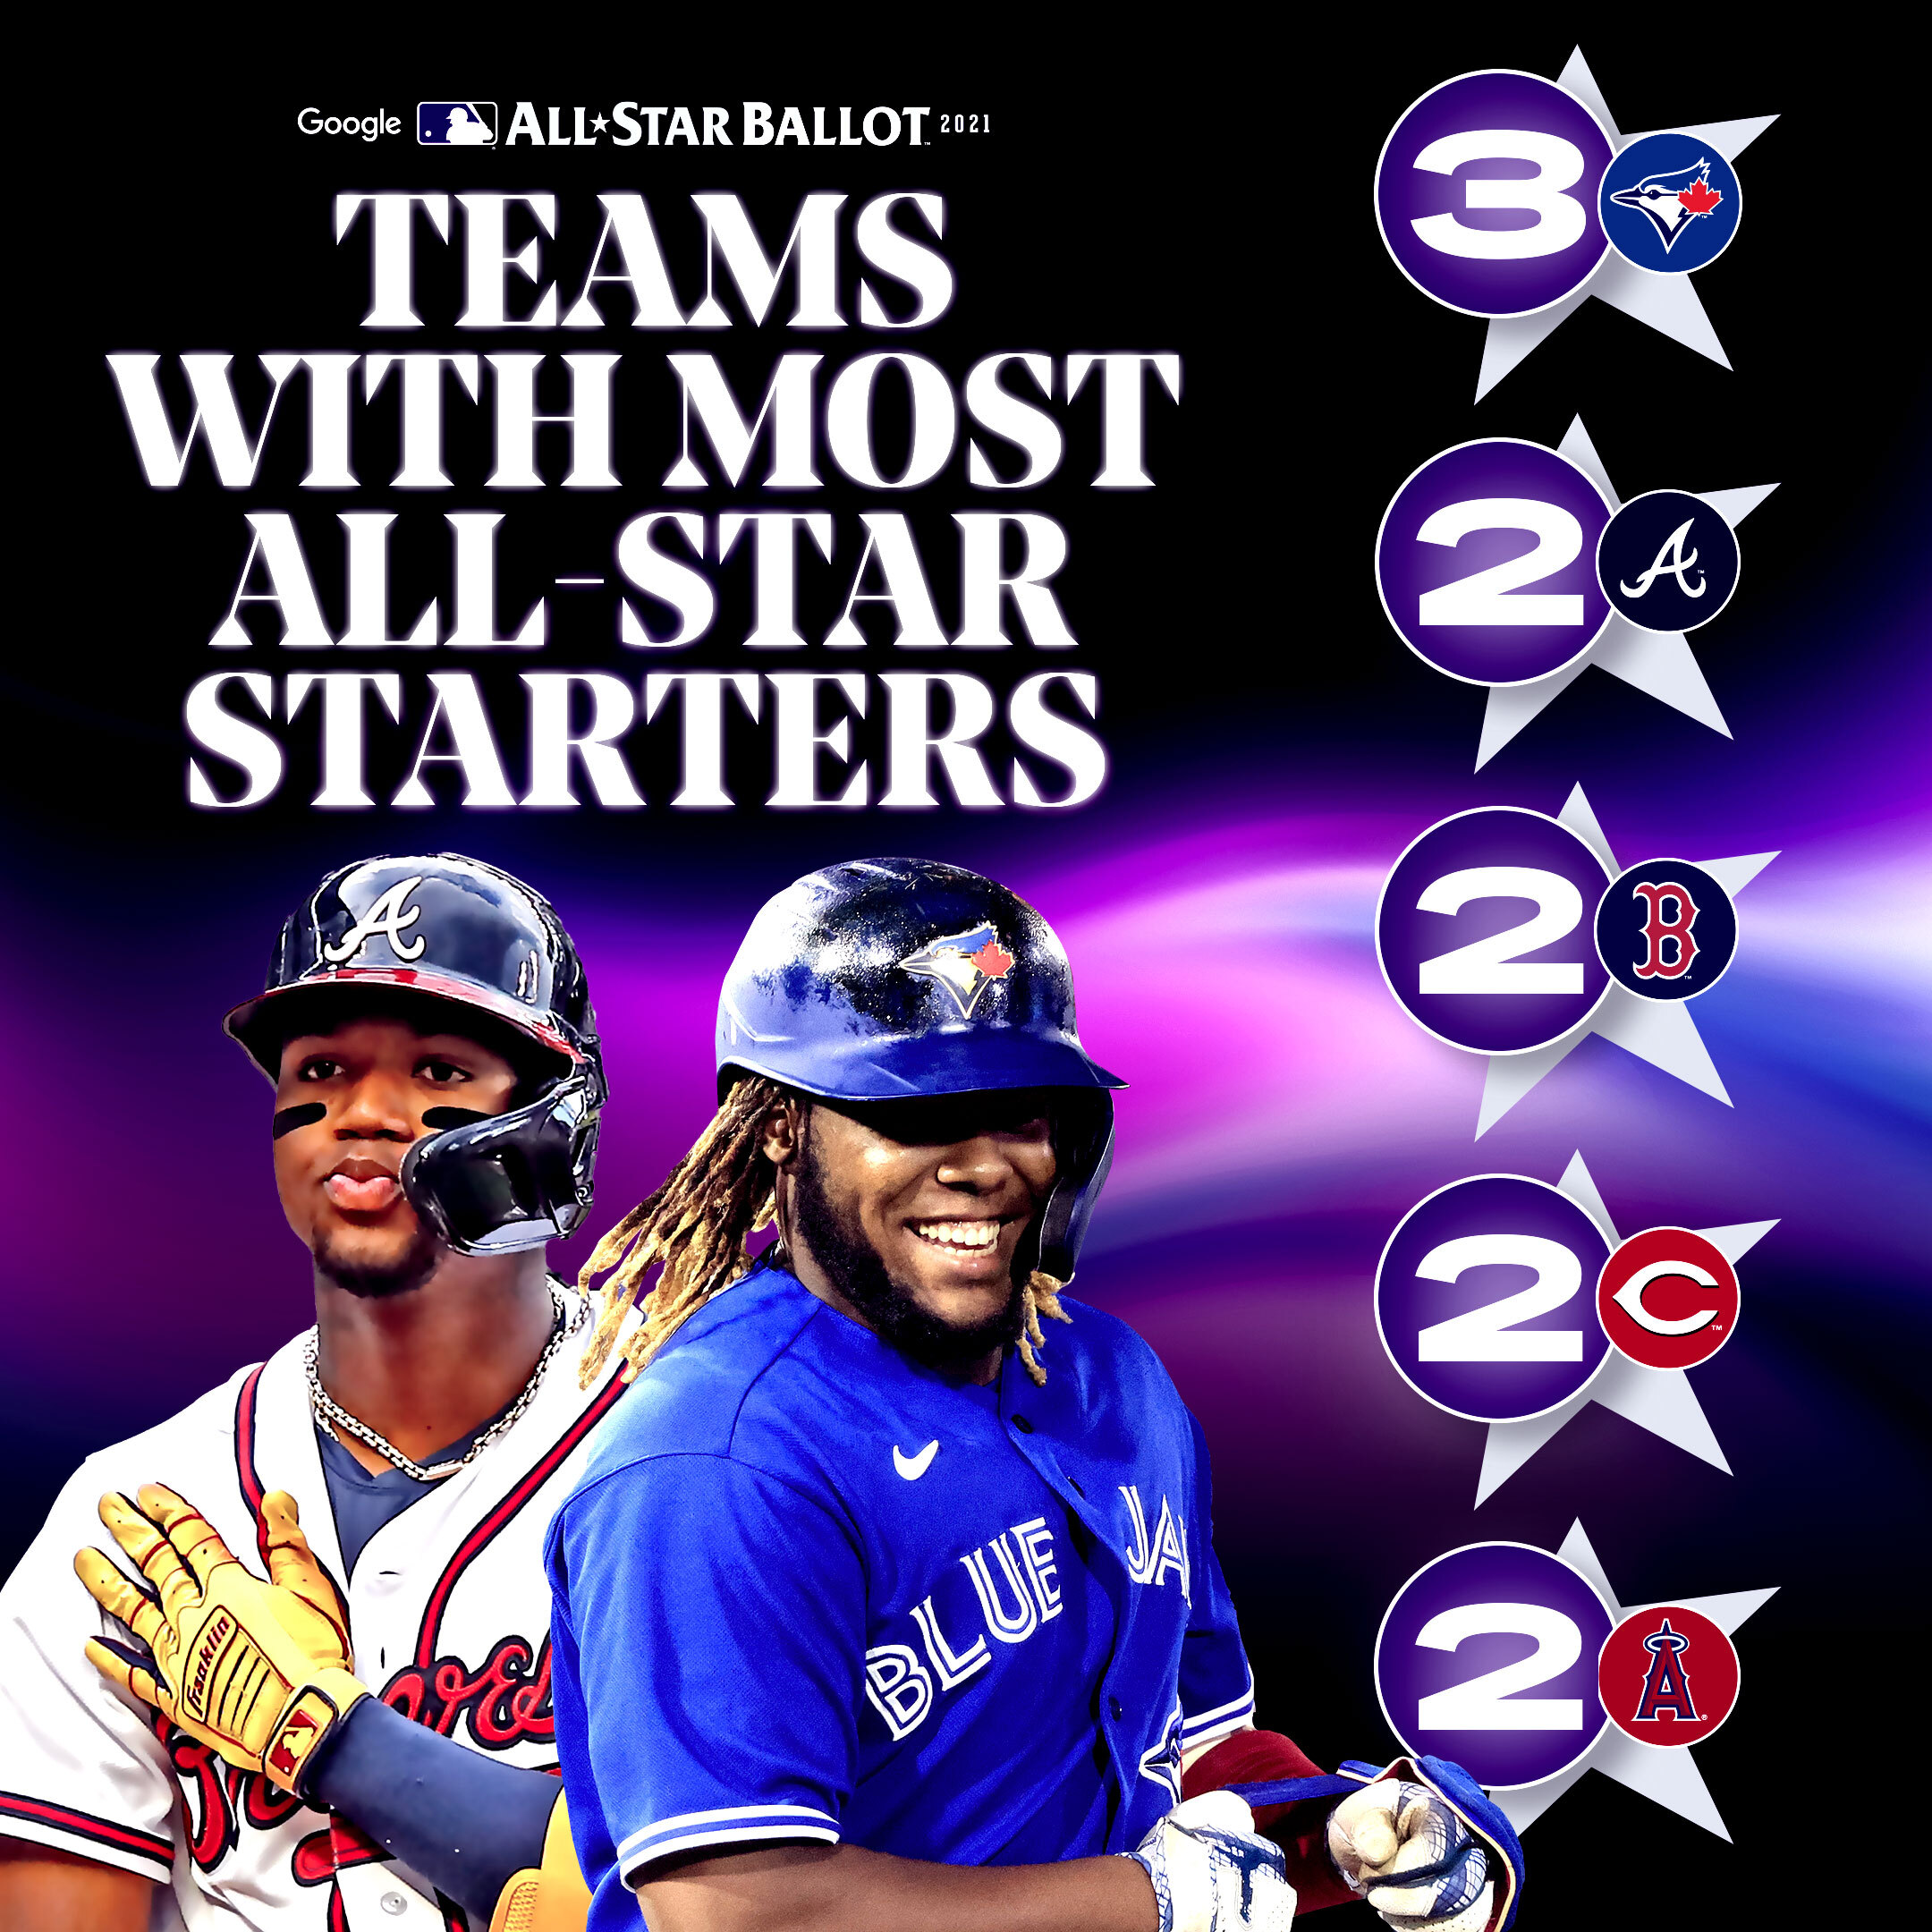 MLB All-Star Roster Starters and Reserves